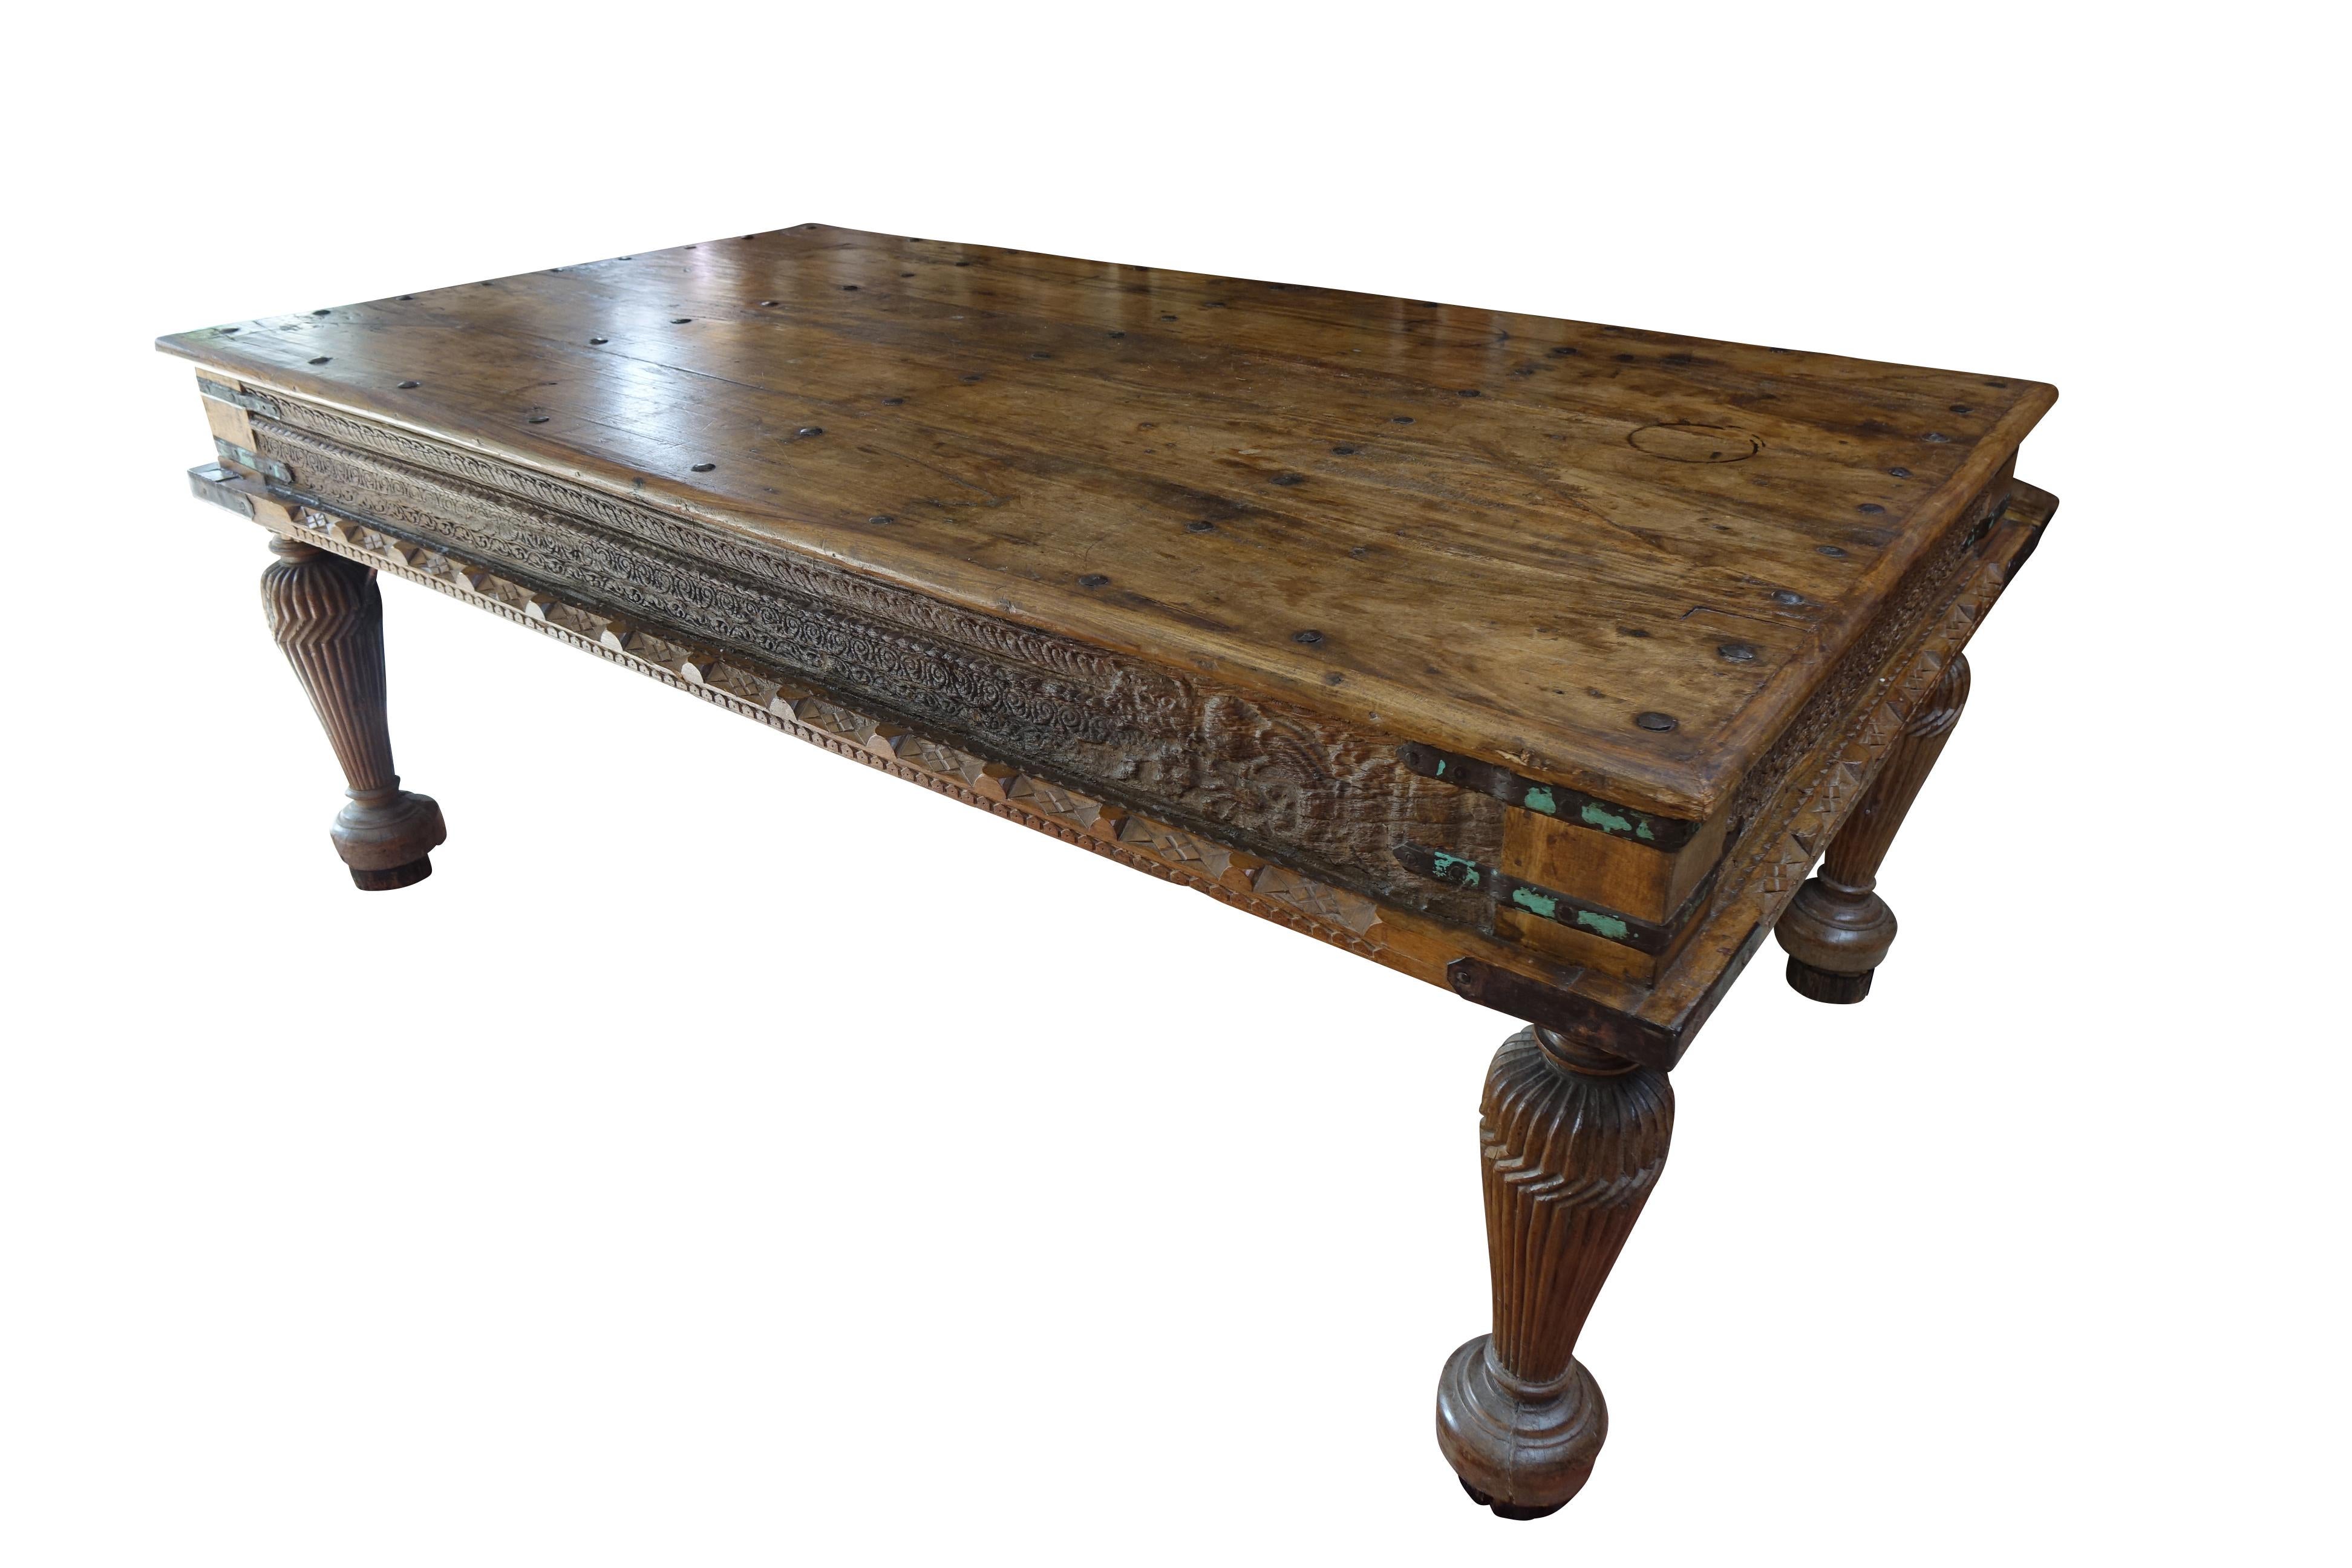  Spectacular large Indian Maharaja palace table-console in teakwood, 19th century.
 A spectacular palace table, often used as a console in the enormous corridors of the Maharajas' palaces. Very decorative piece perfect for large houses or big